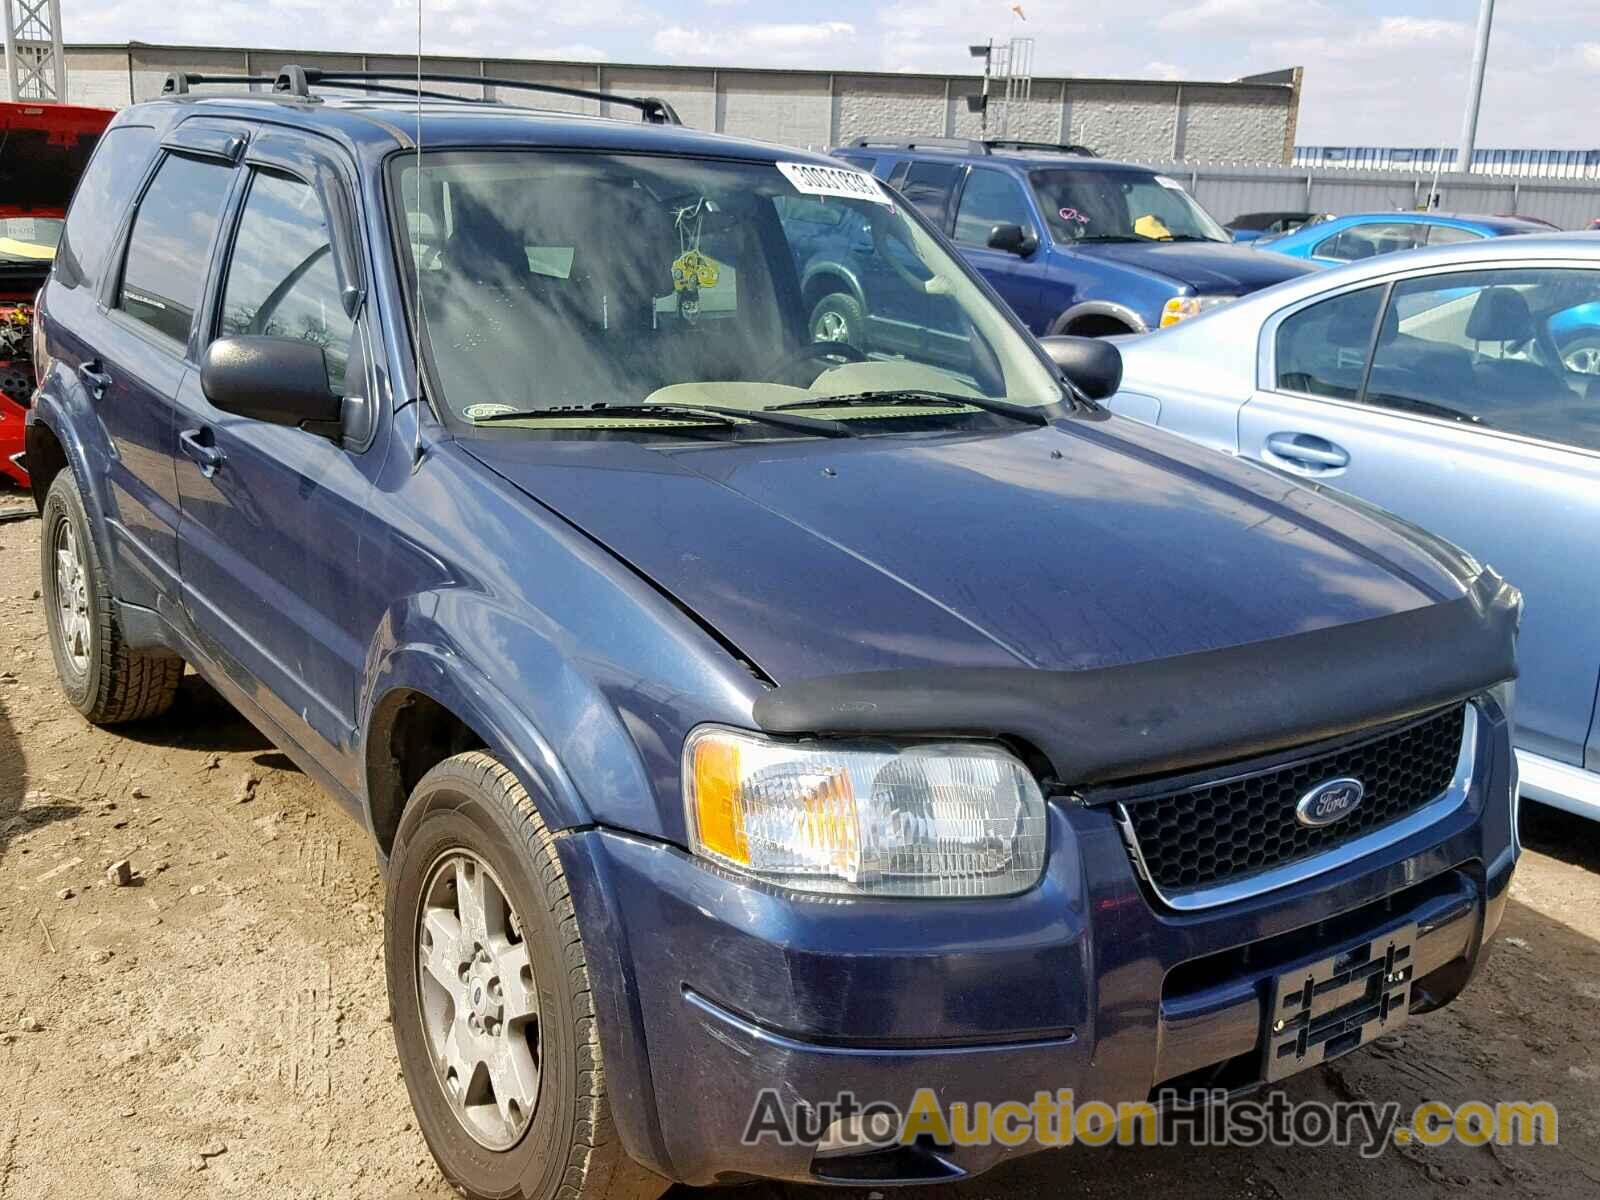 2003 FORD ESCAPE LIMITED, 1FMCU94133KD98401